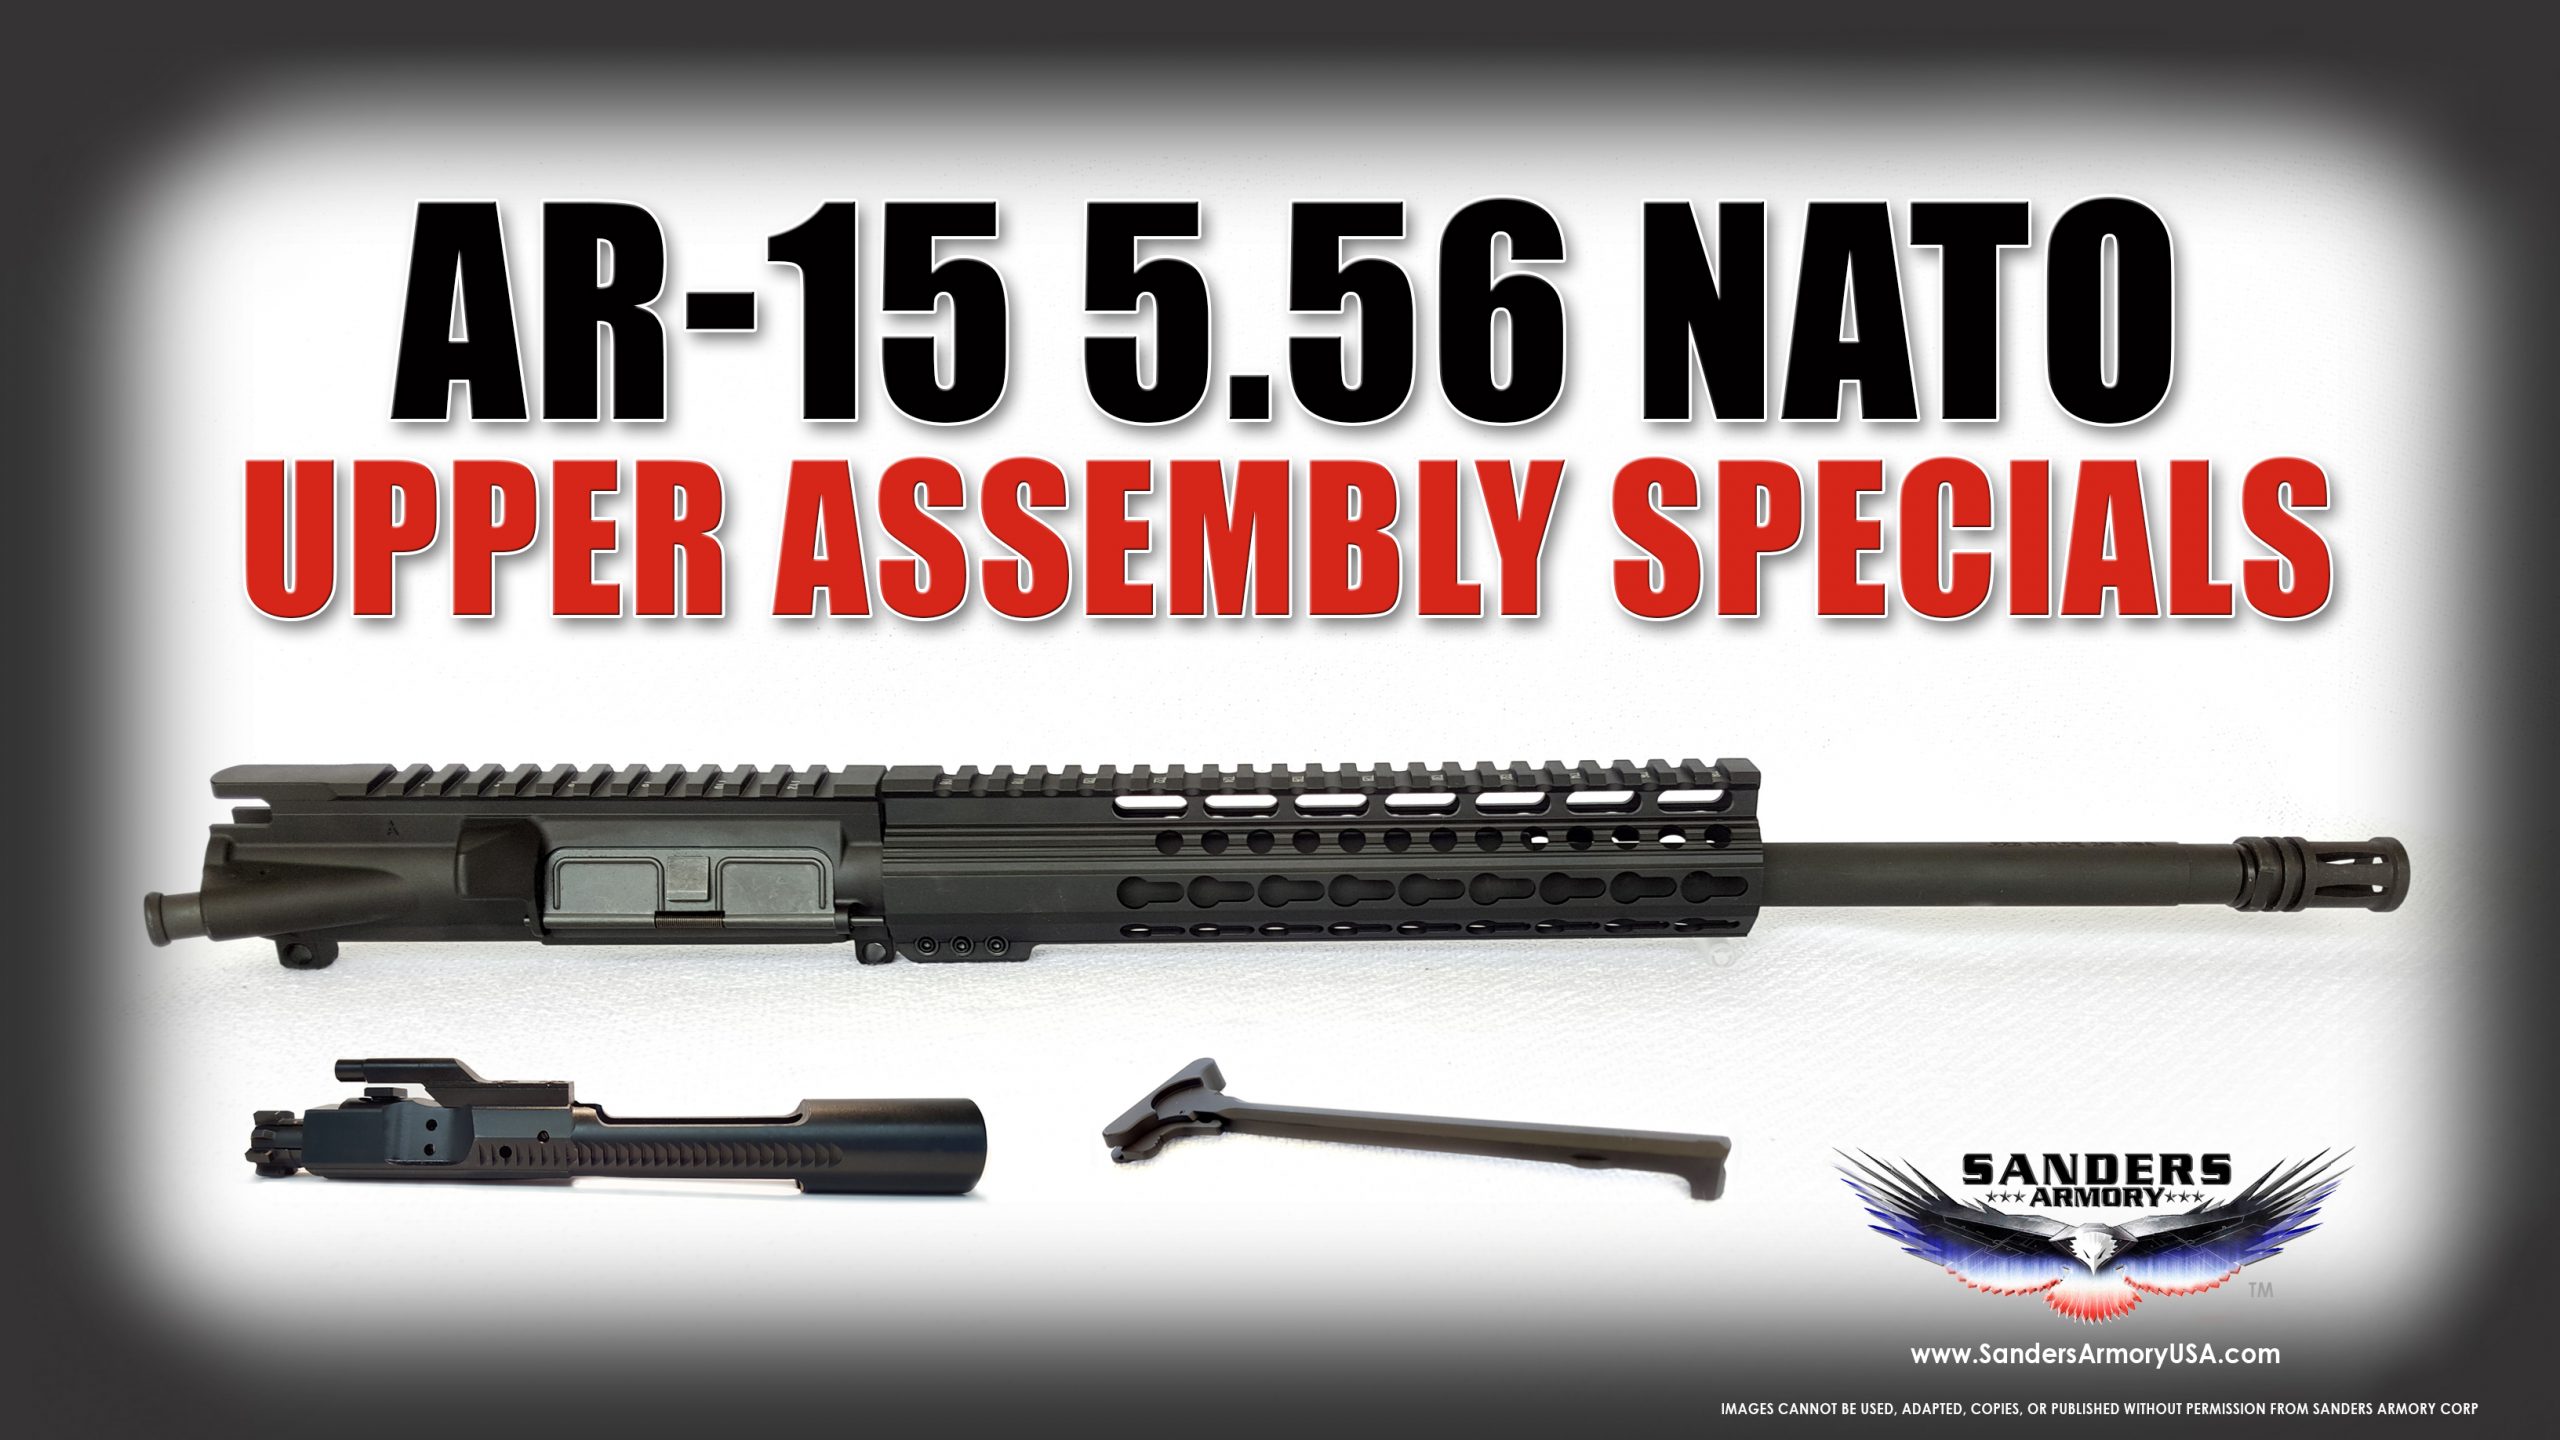 Sanders Armory 5.56 NATO Upper Assembly